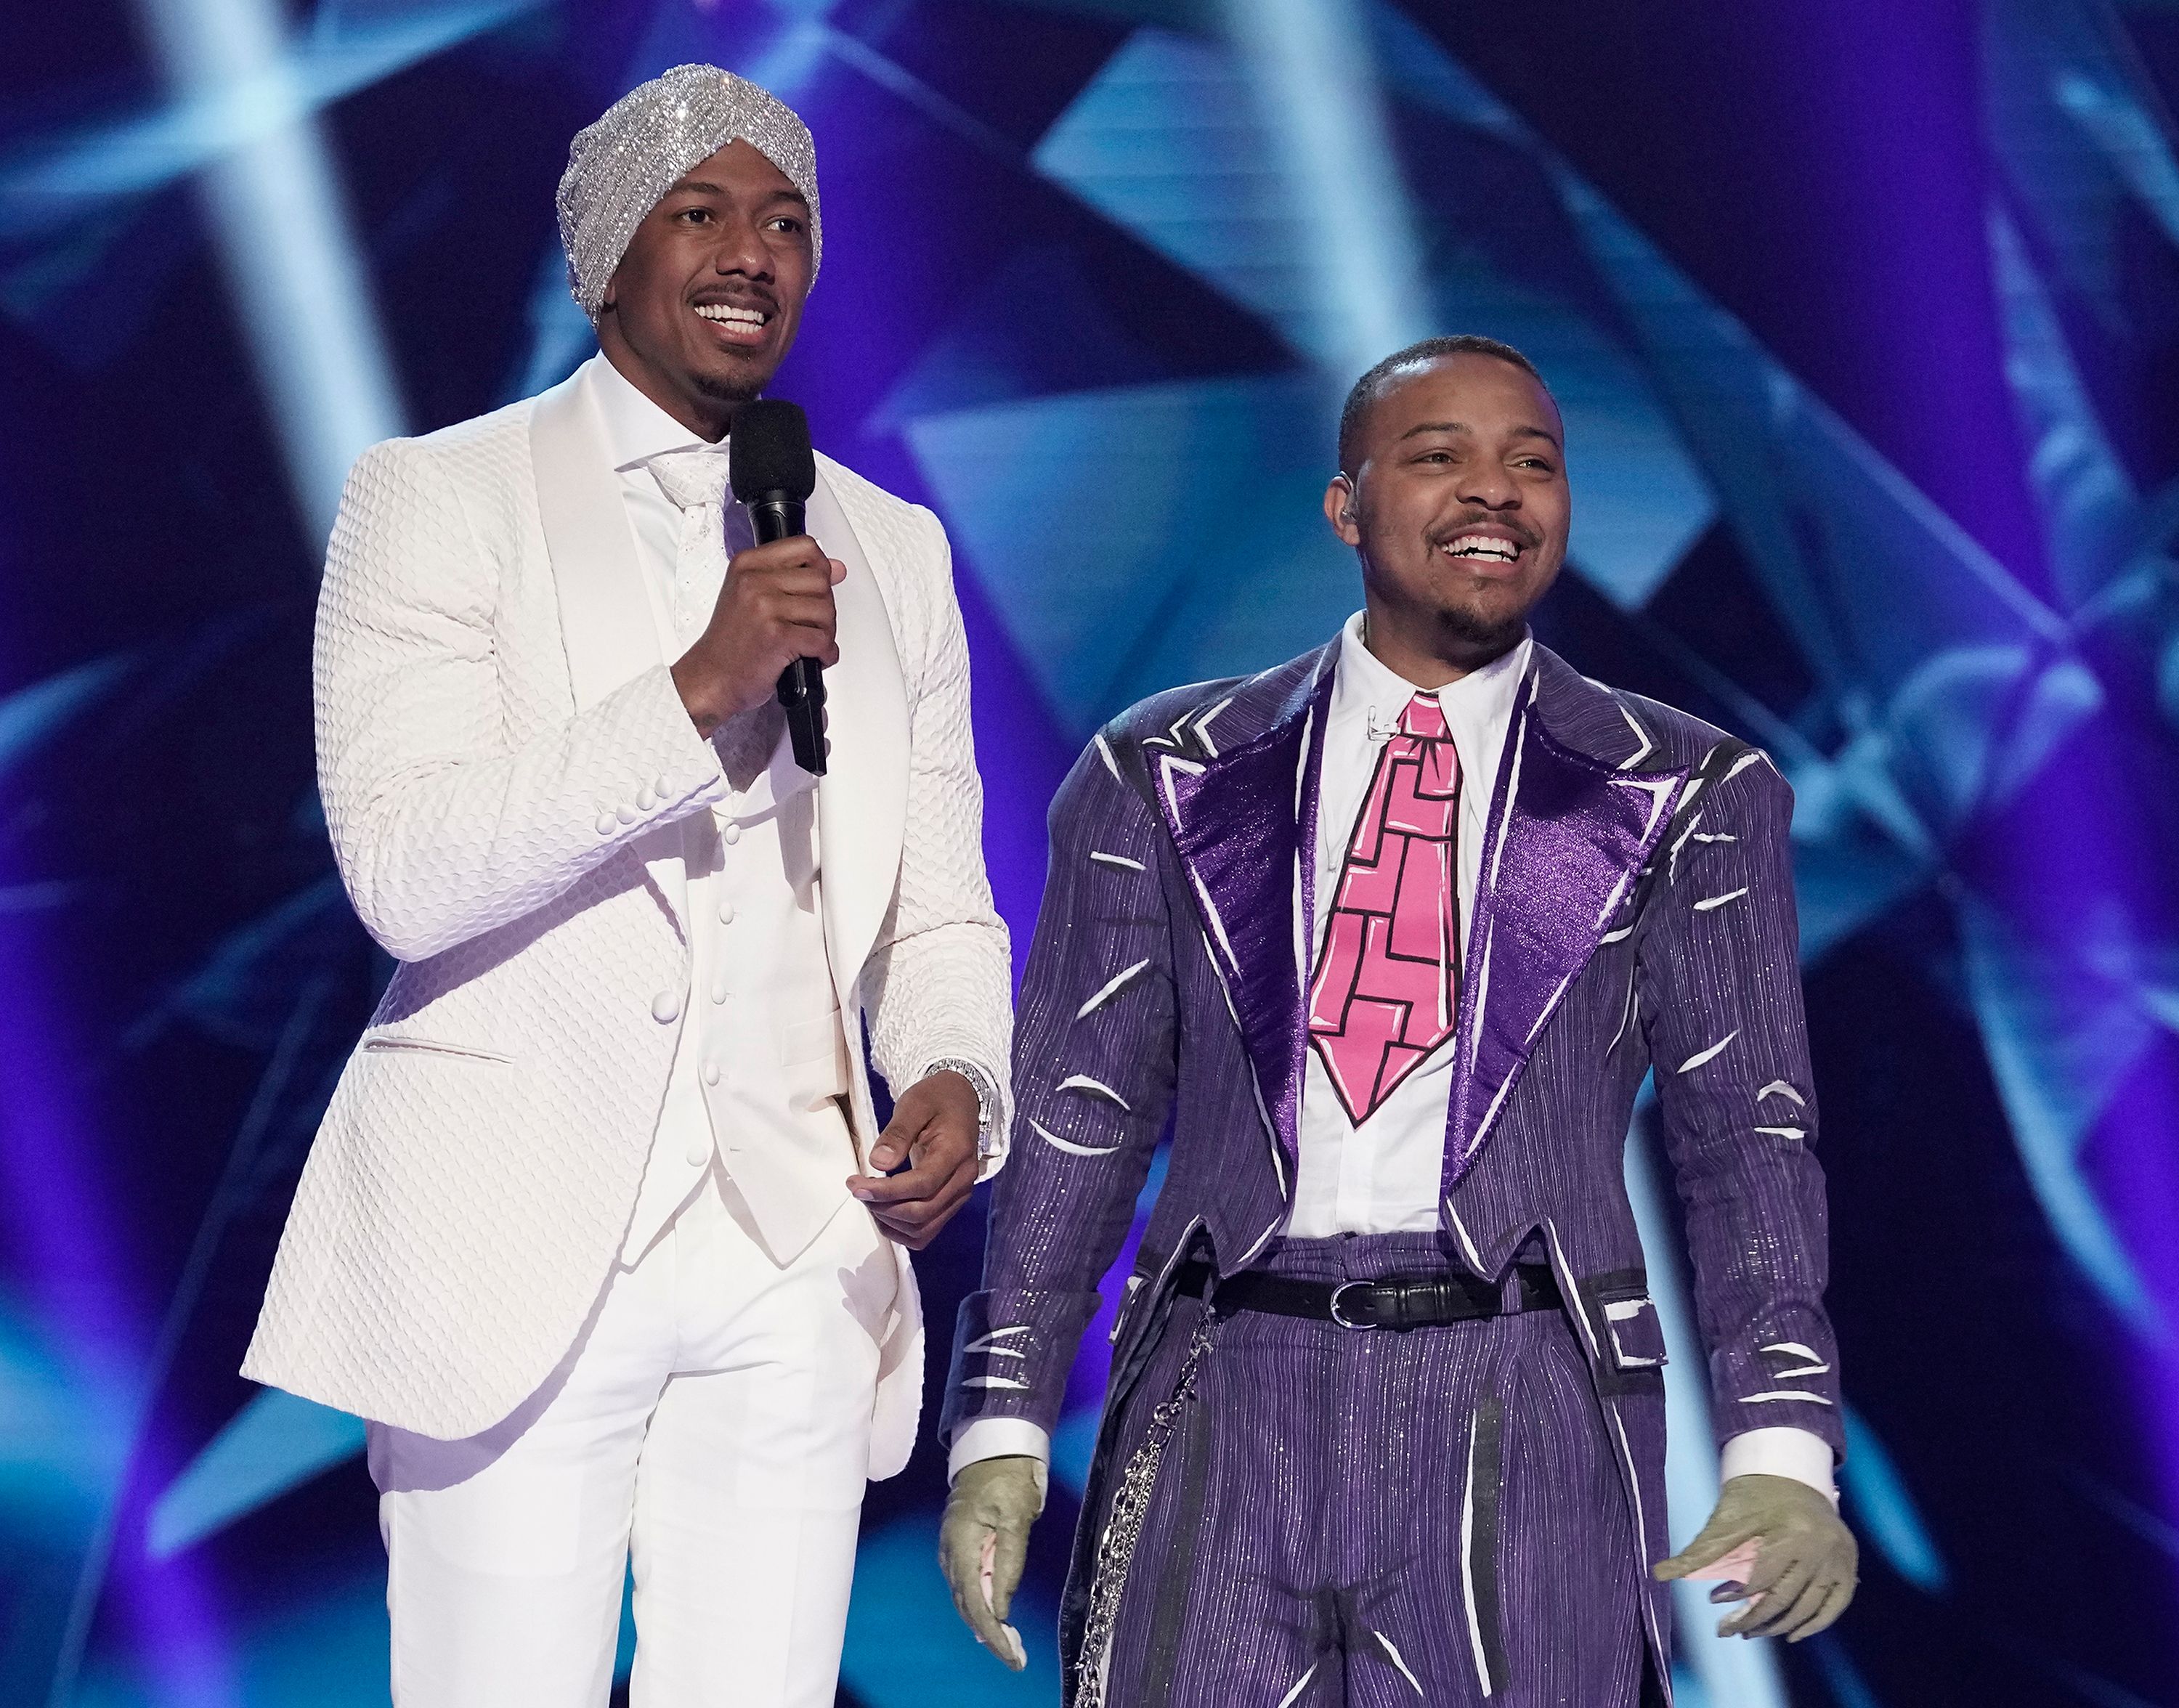 Why is Nick Cannon Not Hosting The Masked Singer - Everything You Should Know